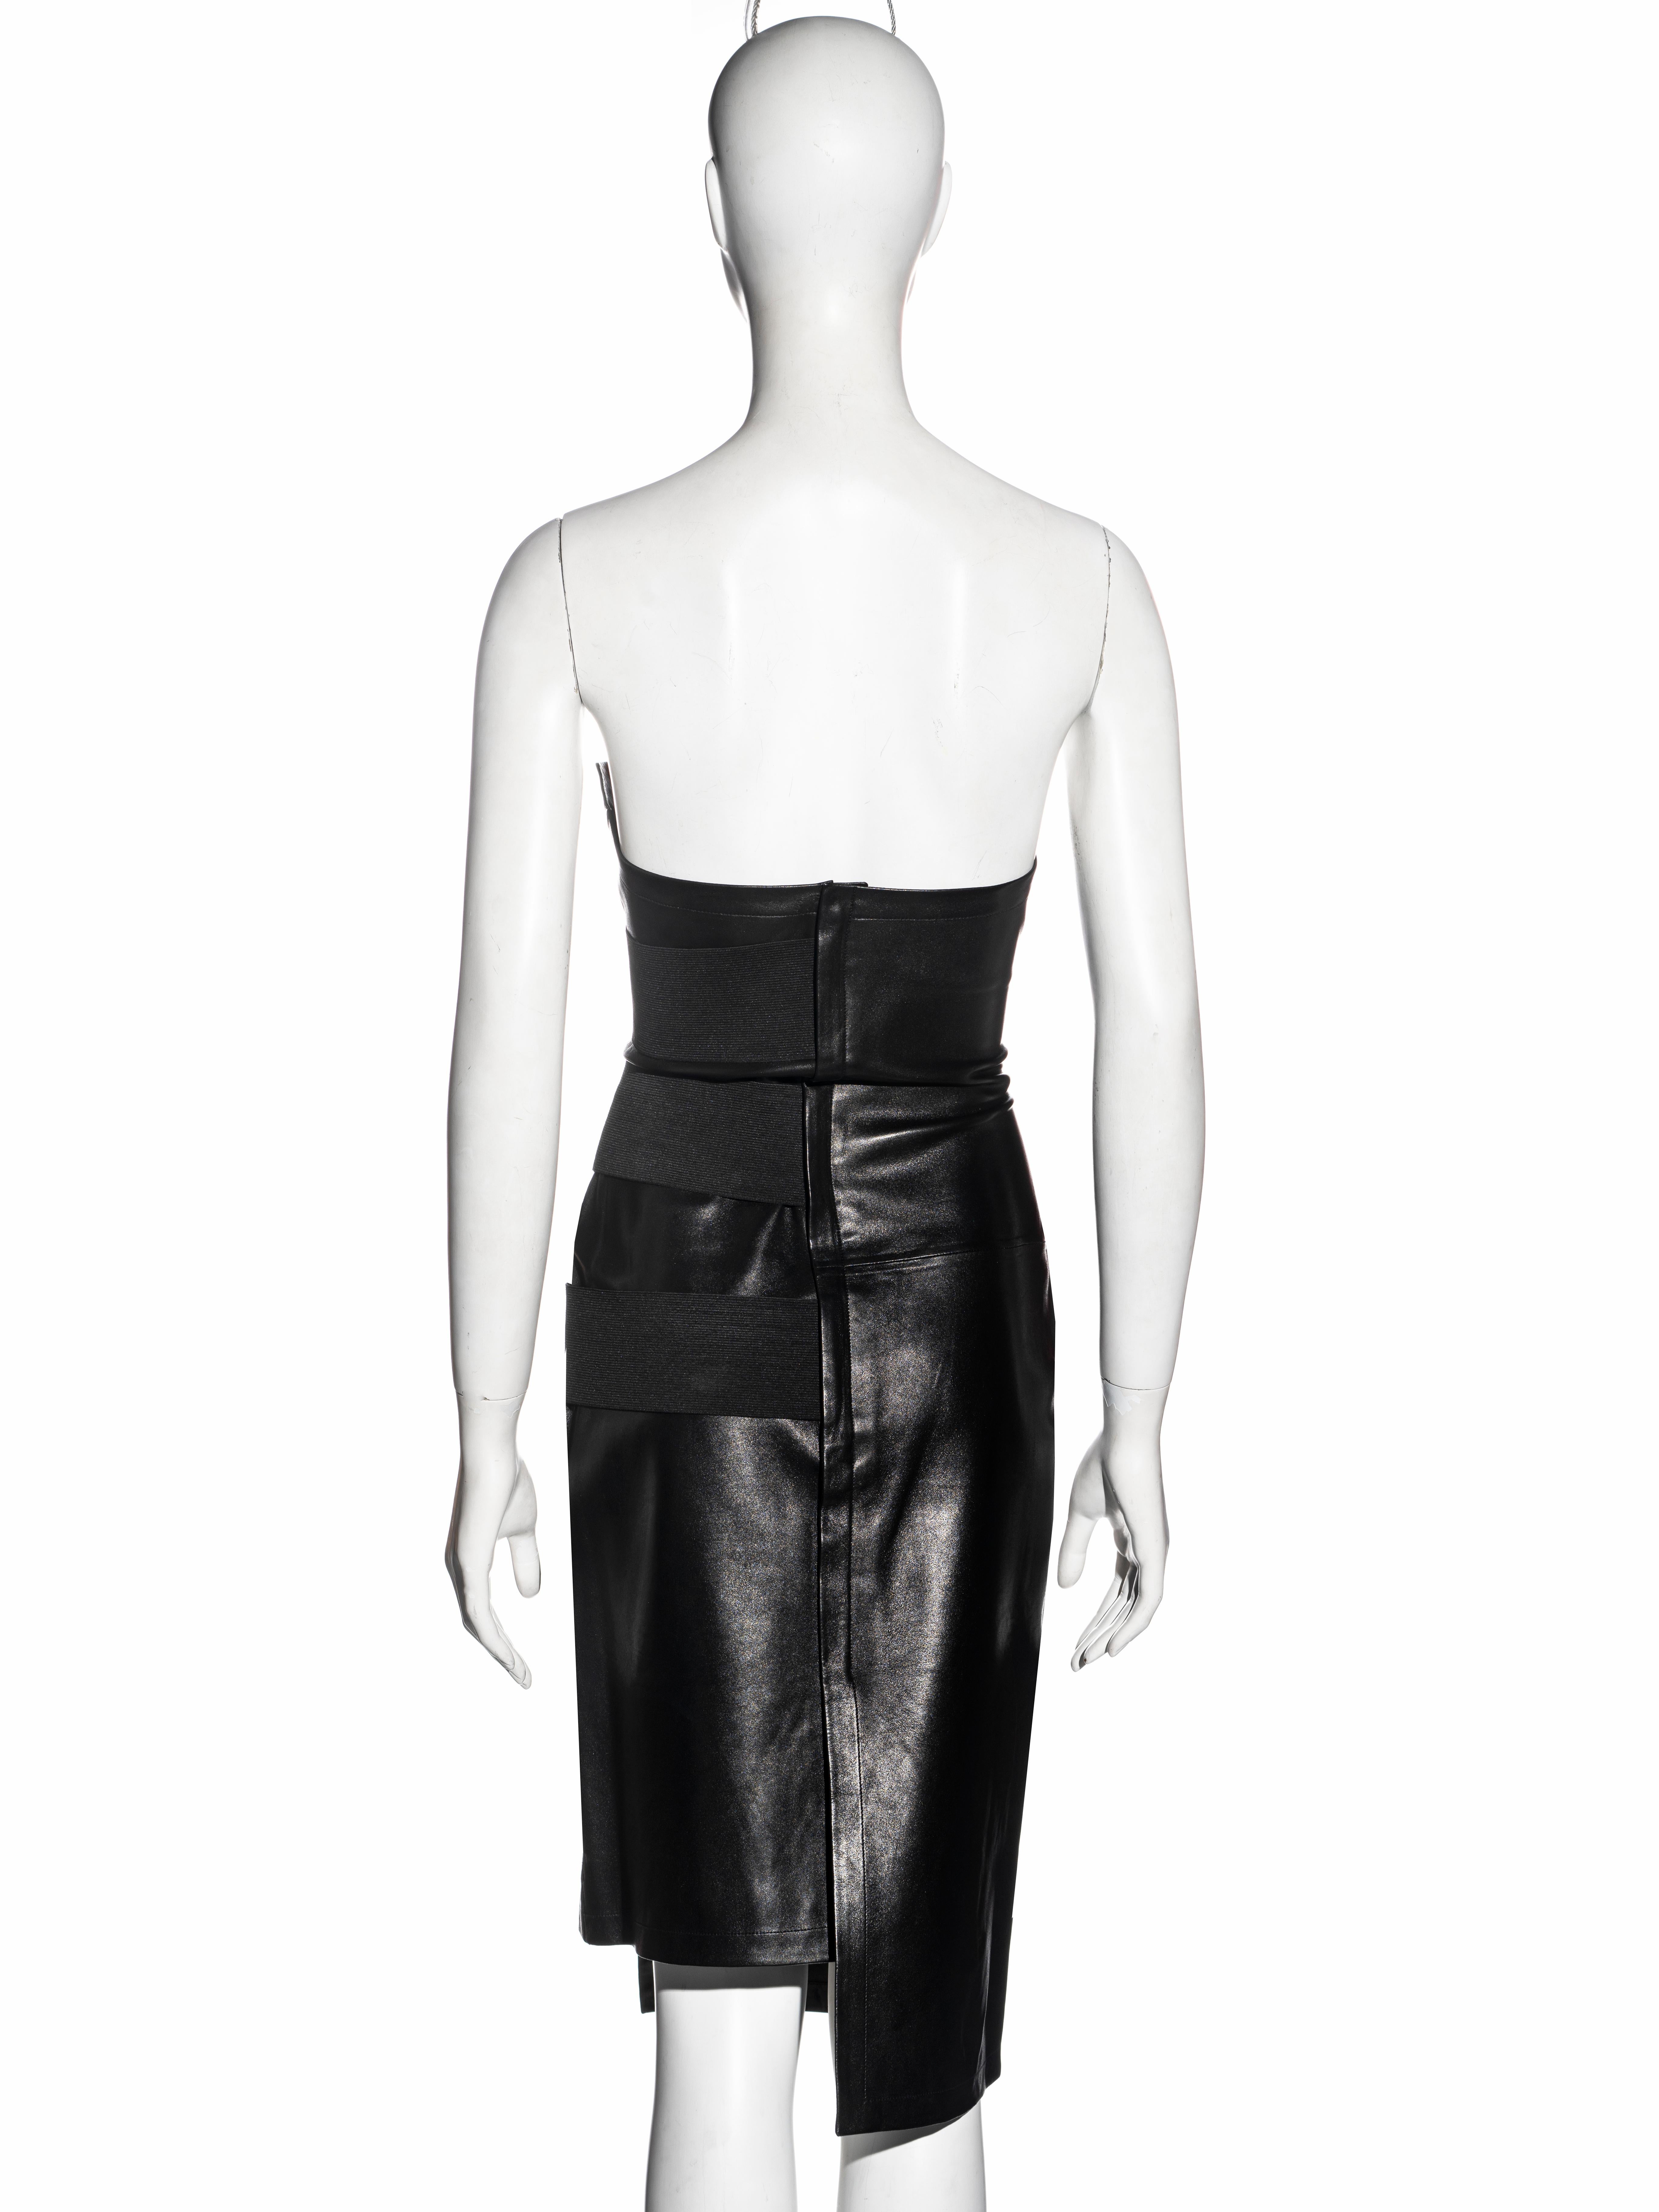 Yves Saint Laurent by Tom Ford black leather strapless wrap dress, ss 2001 2